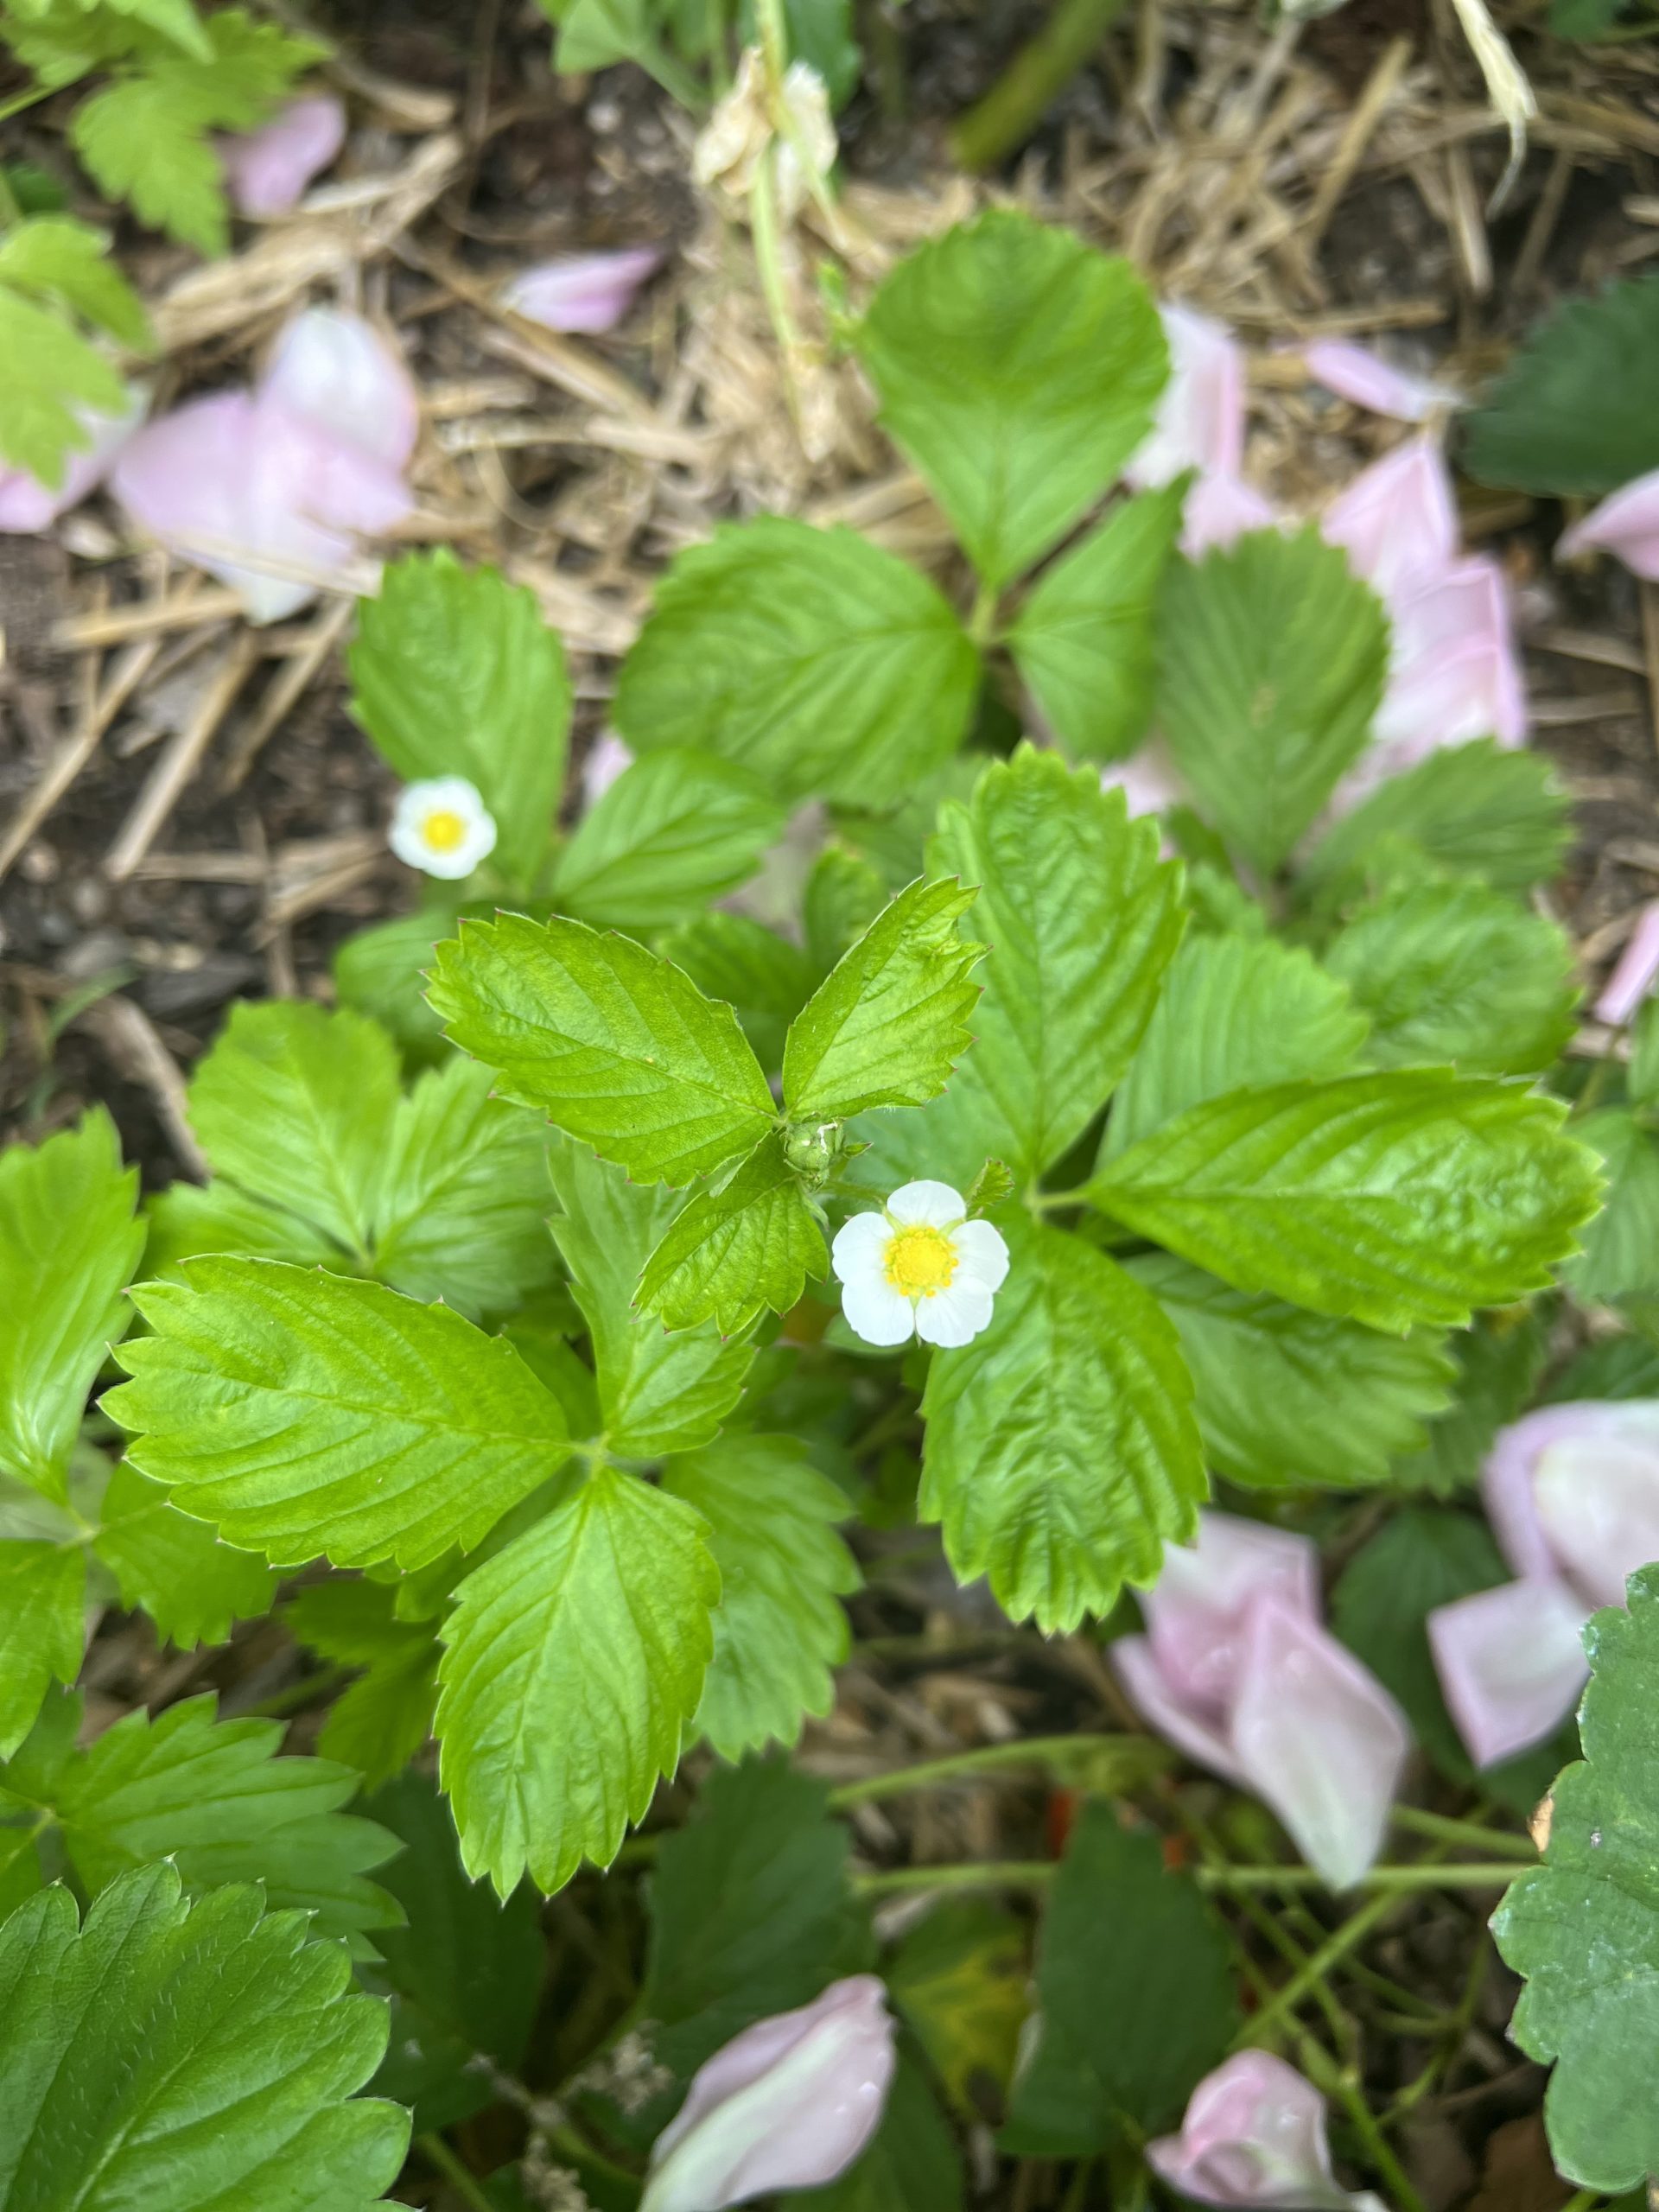 A strawberry plant with white flowers on it